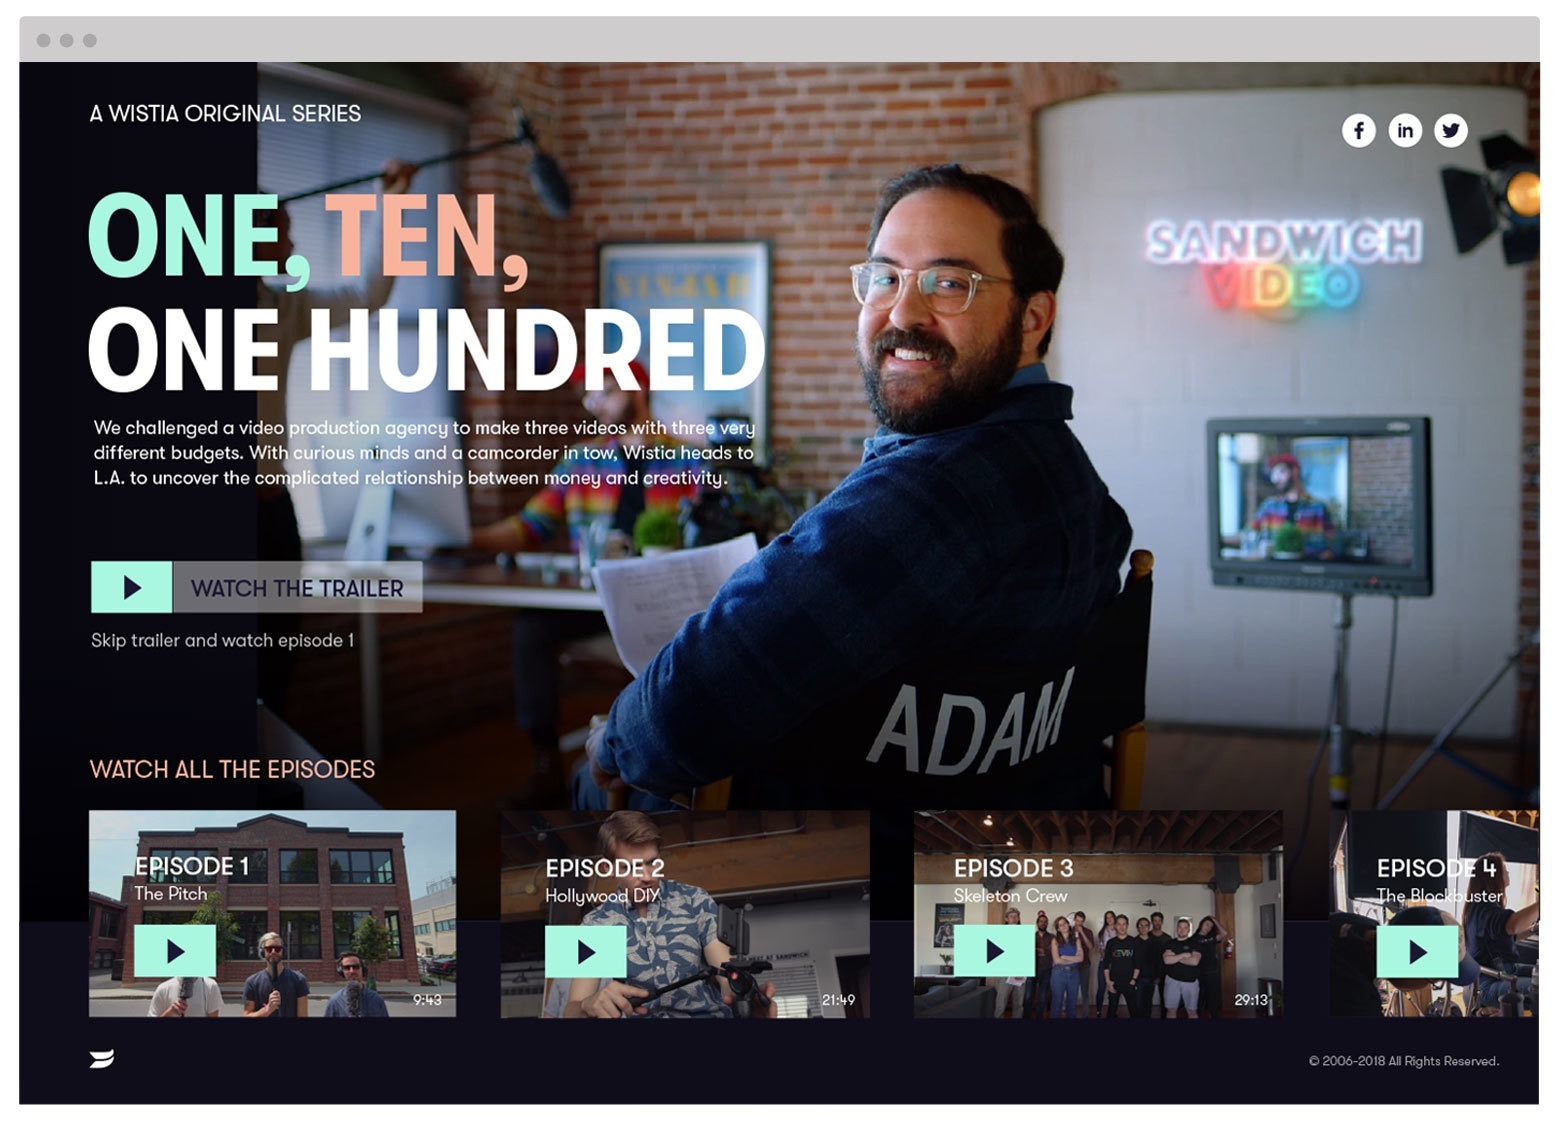 Wistia's "One, Ten, One Hundred" series